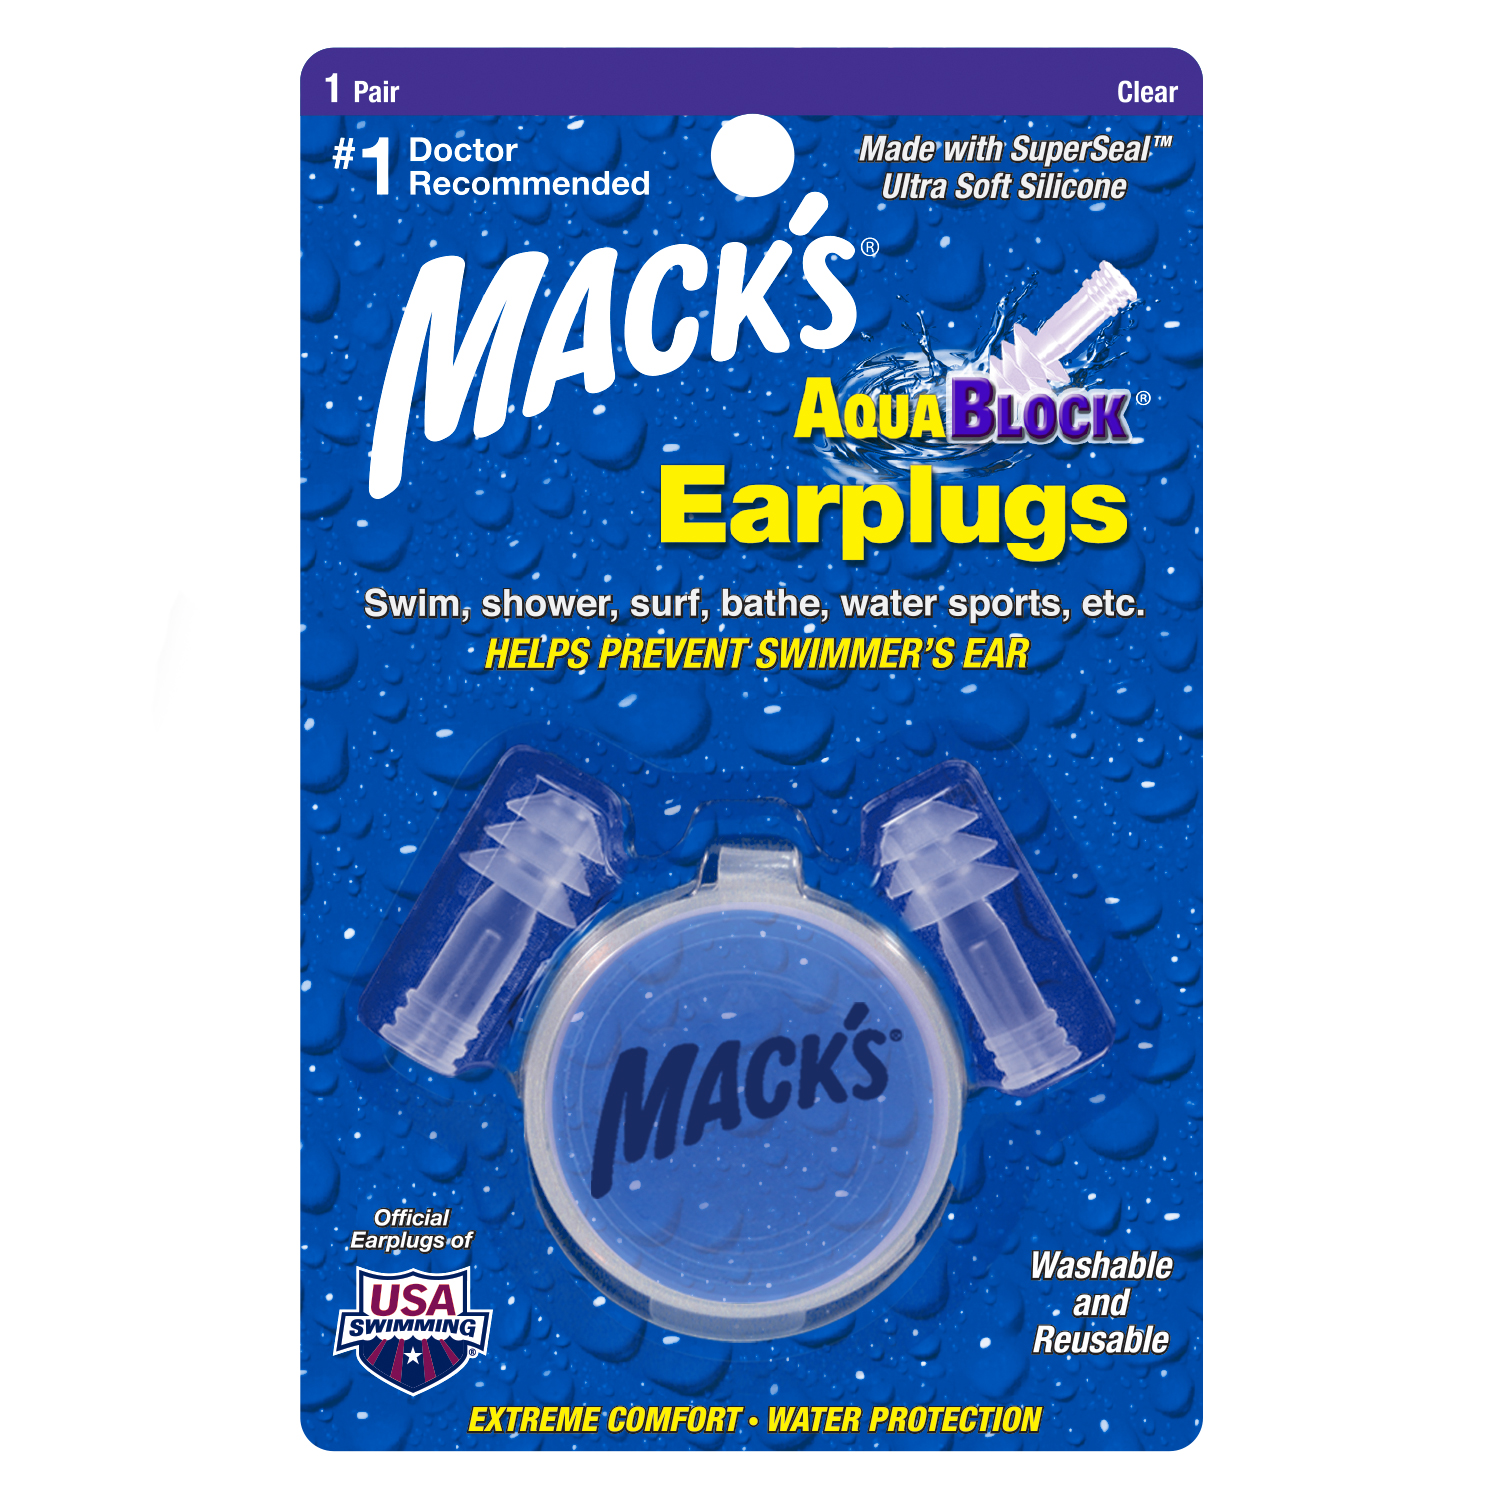 Mack's AquaBlock Swimming Earplugs - Comfortable, Waterproof, Reusable Silicone Ear Plugs for Swimming, Snorkeling, Showering, Surfing, Bathing, and Water Sports - #1 Doctor Recommended